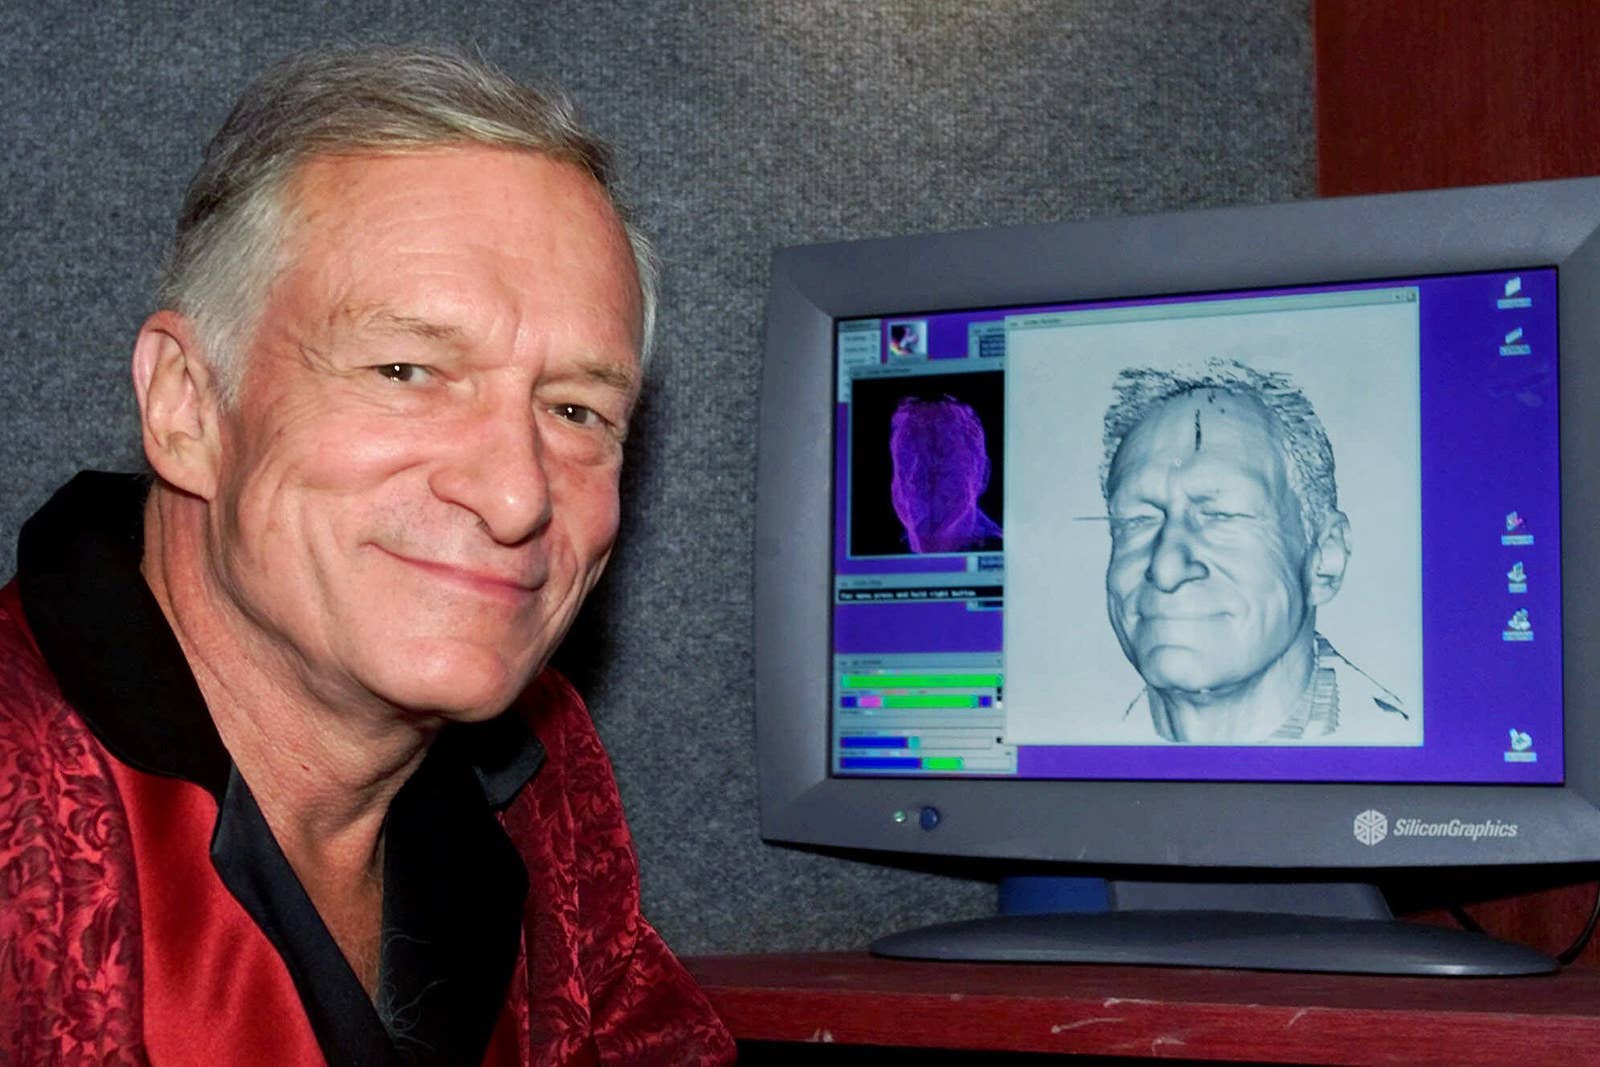 Hefner poses next to a laser-generated image of his head on a computer screen following a laser scanning session on Sept. 26, 2000, at the Playboy Mansion in Los Angeles. The resulting image was used to create an exact wax model of his head for a figure at the Hollywood Wax Museum.